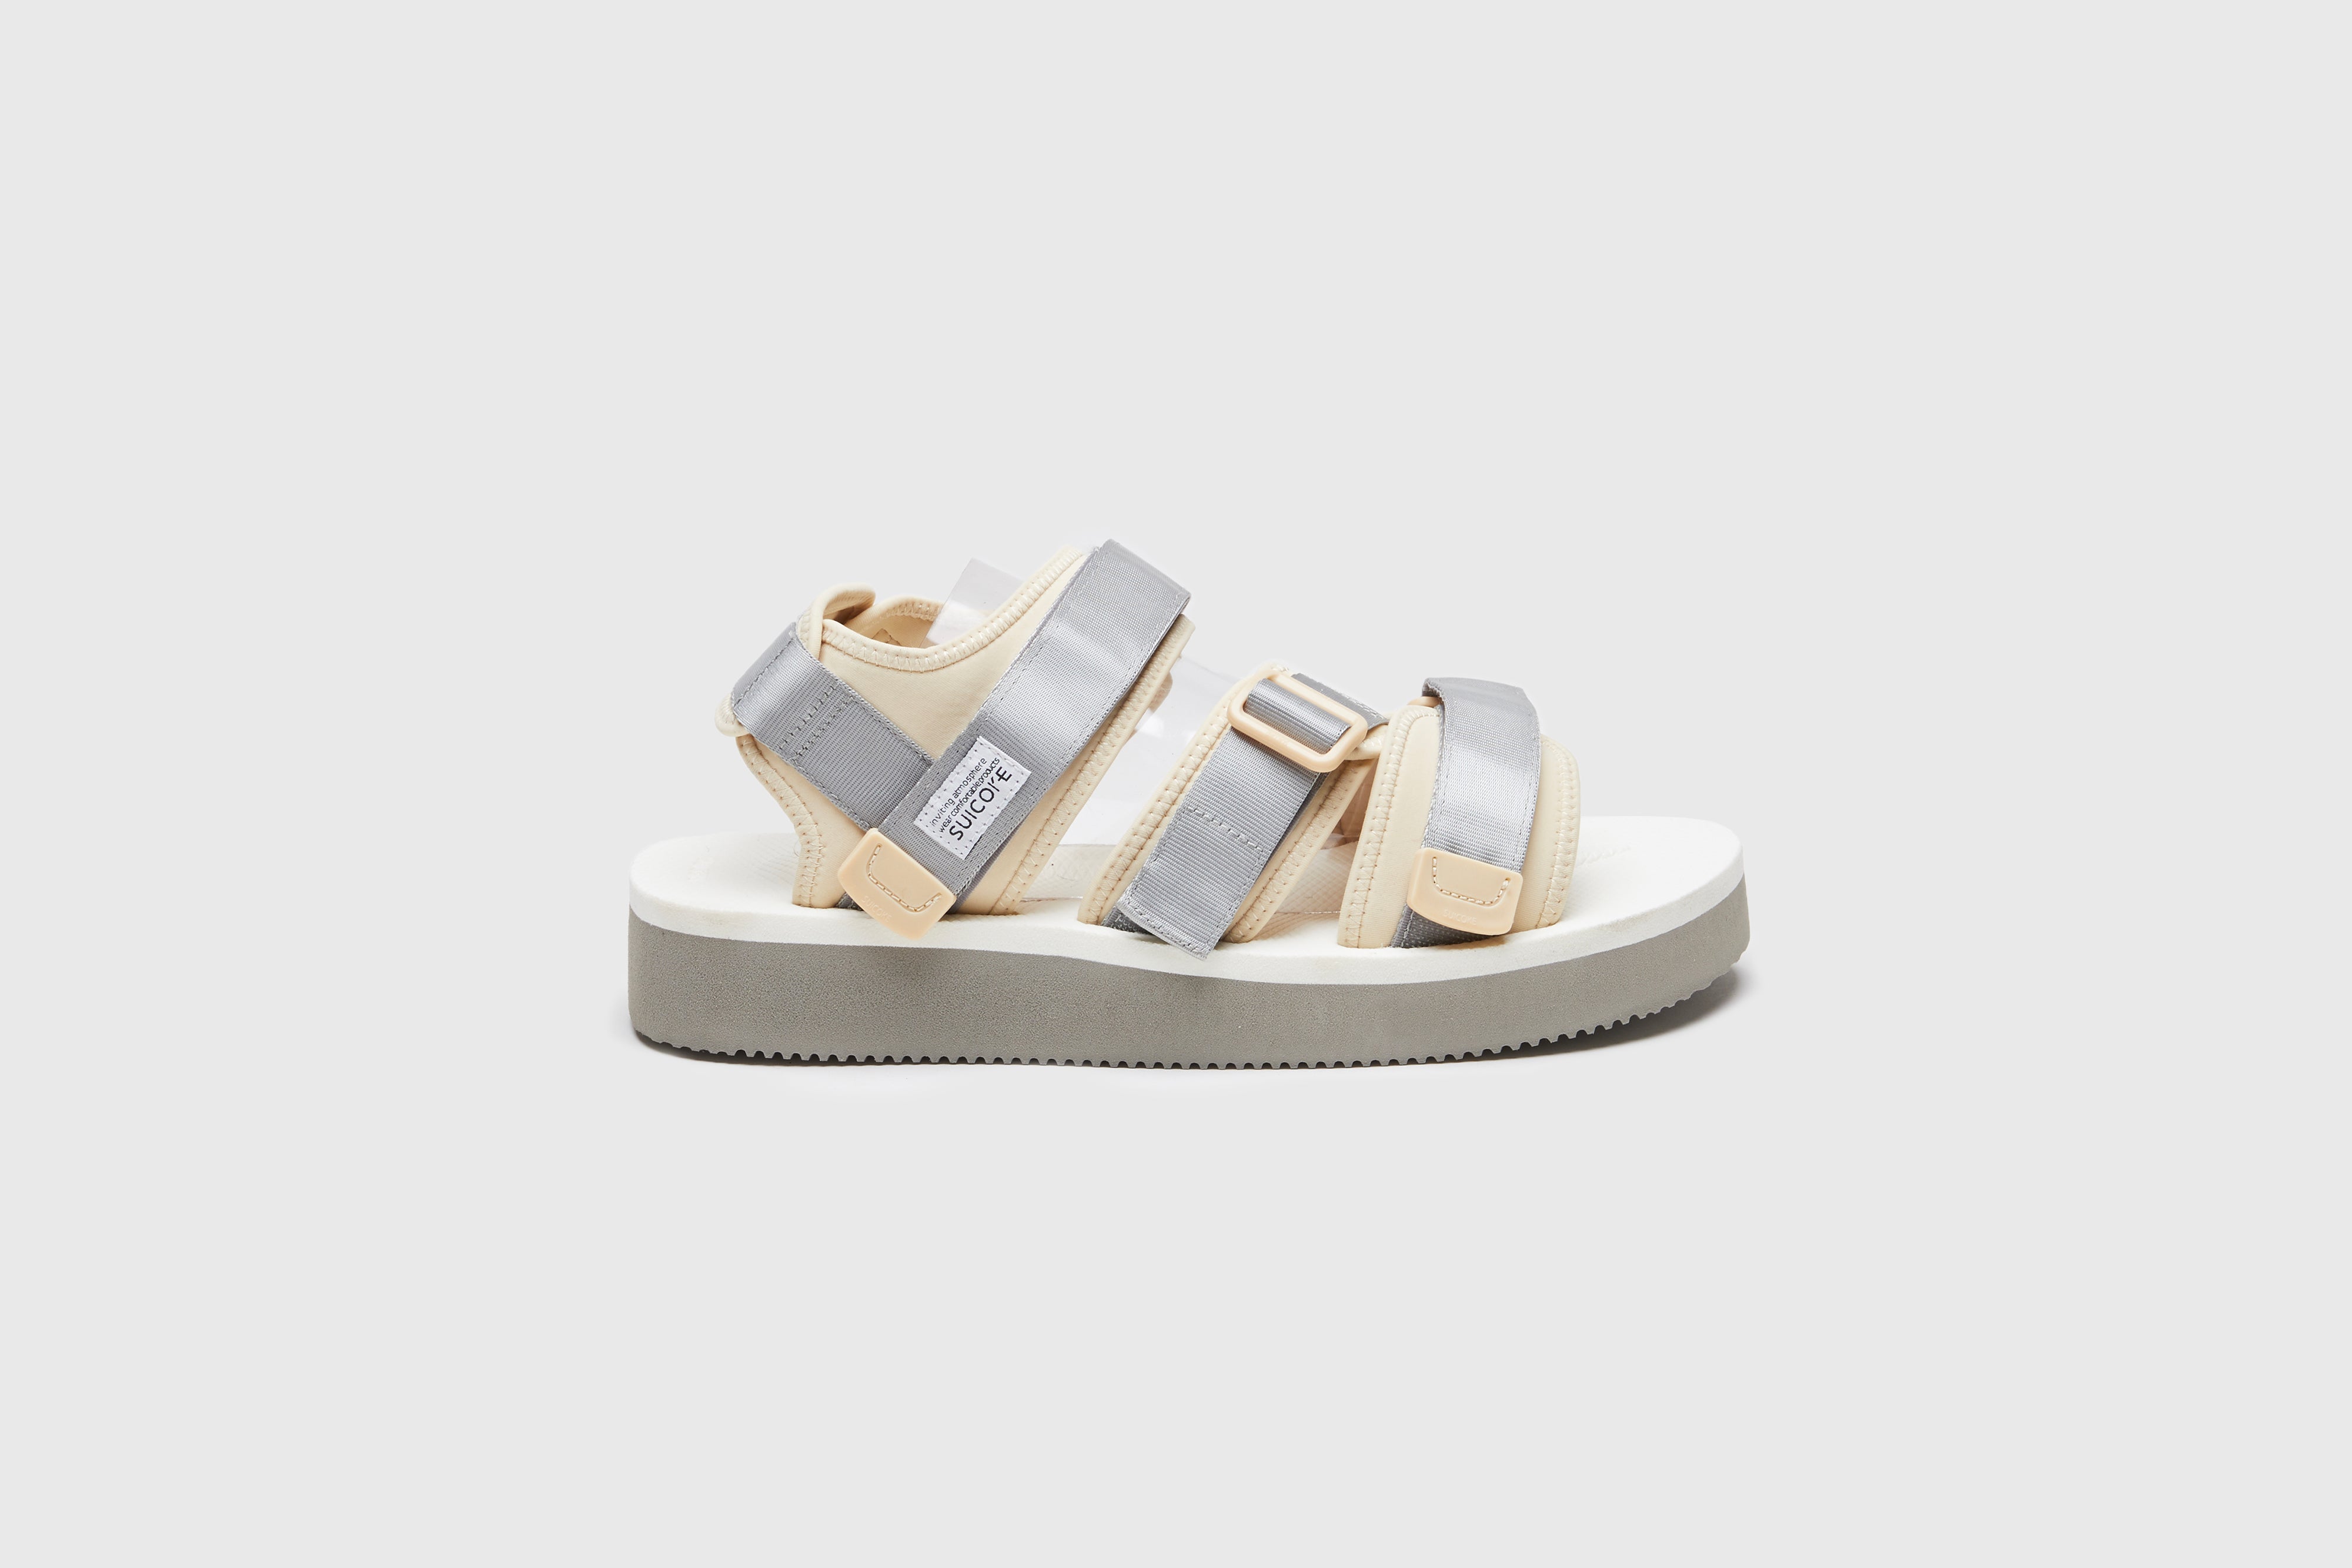 SUICOKE KISEE-PO sandals with gray &amp; white nylon upper, gray &amp; white midsole and sole, strap and logo patch. From Spring/Summer 2023 collection on eightywingold Web Store, an official partner of SUICOKE. OG-044PO GRAY X WHITE